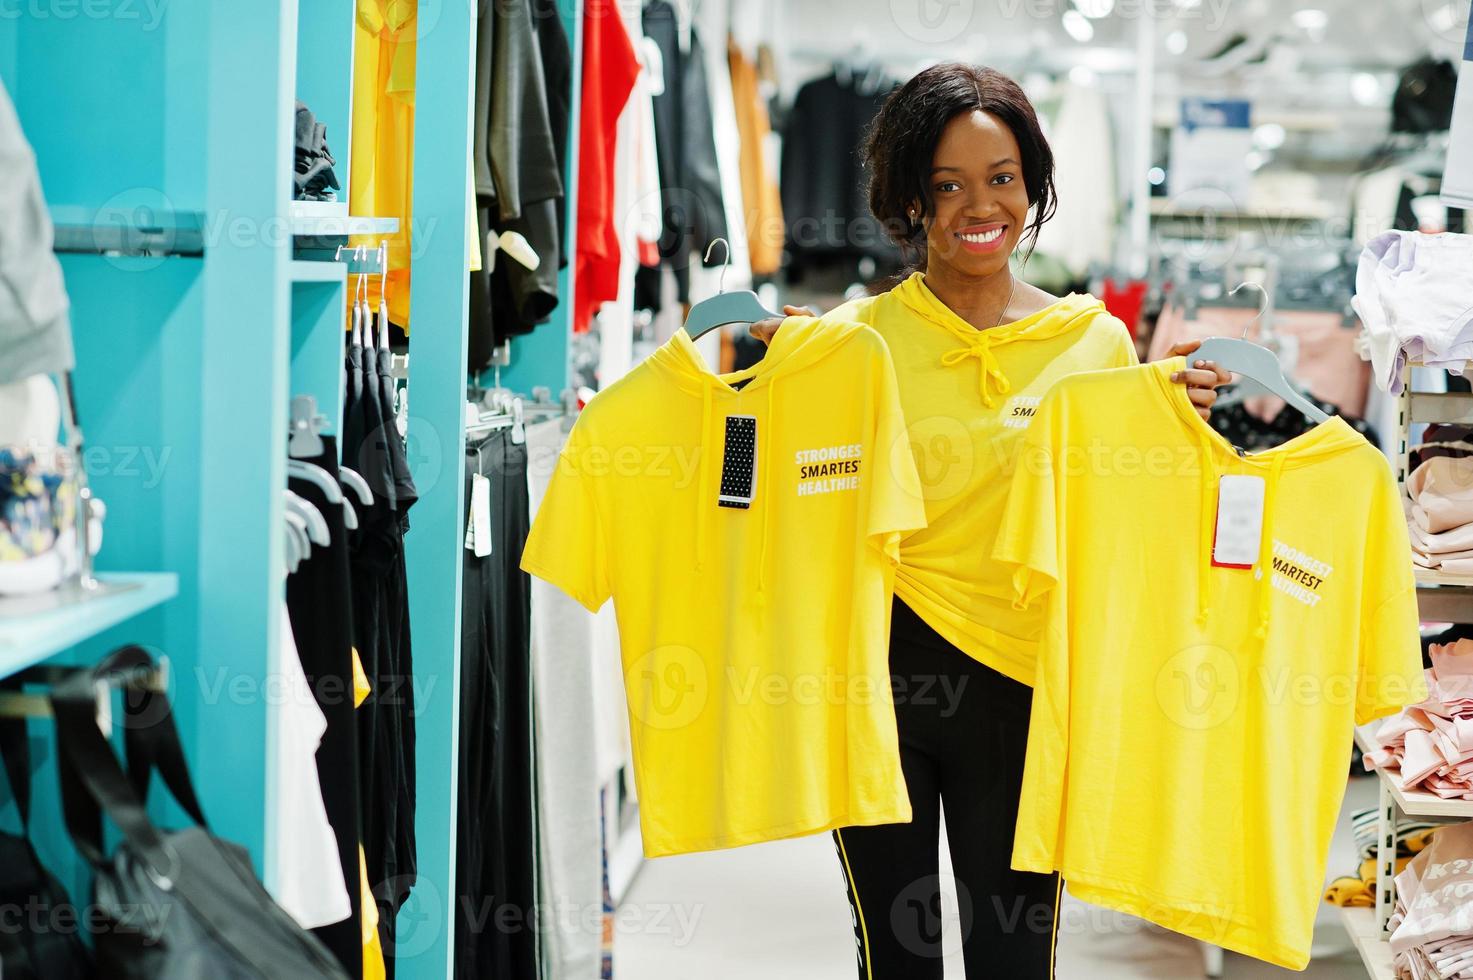 Afican american women in tracksuits shopping at sportswear mall against shelves. She choose yellow t-shirt. Sport store theme. photo